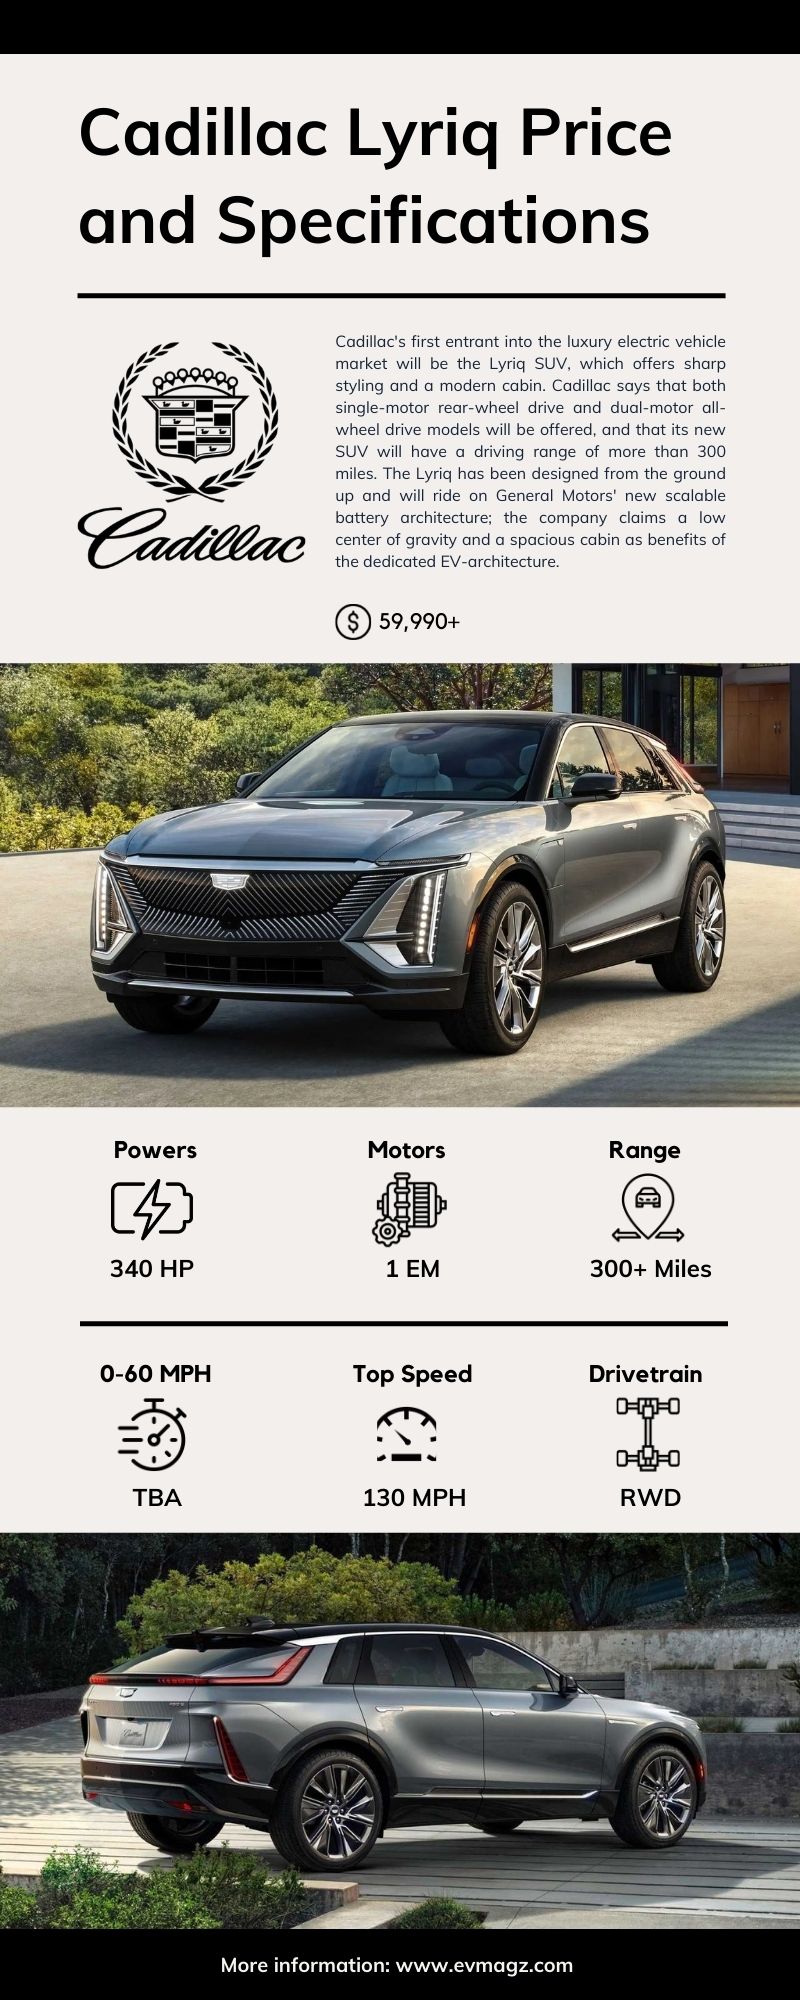 Cadillac Lyriq Price and Specifications Infographic